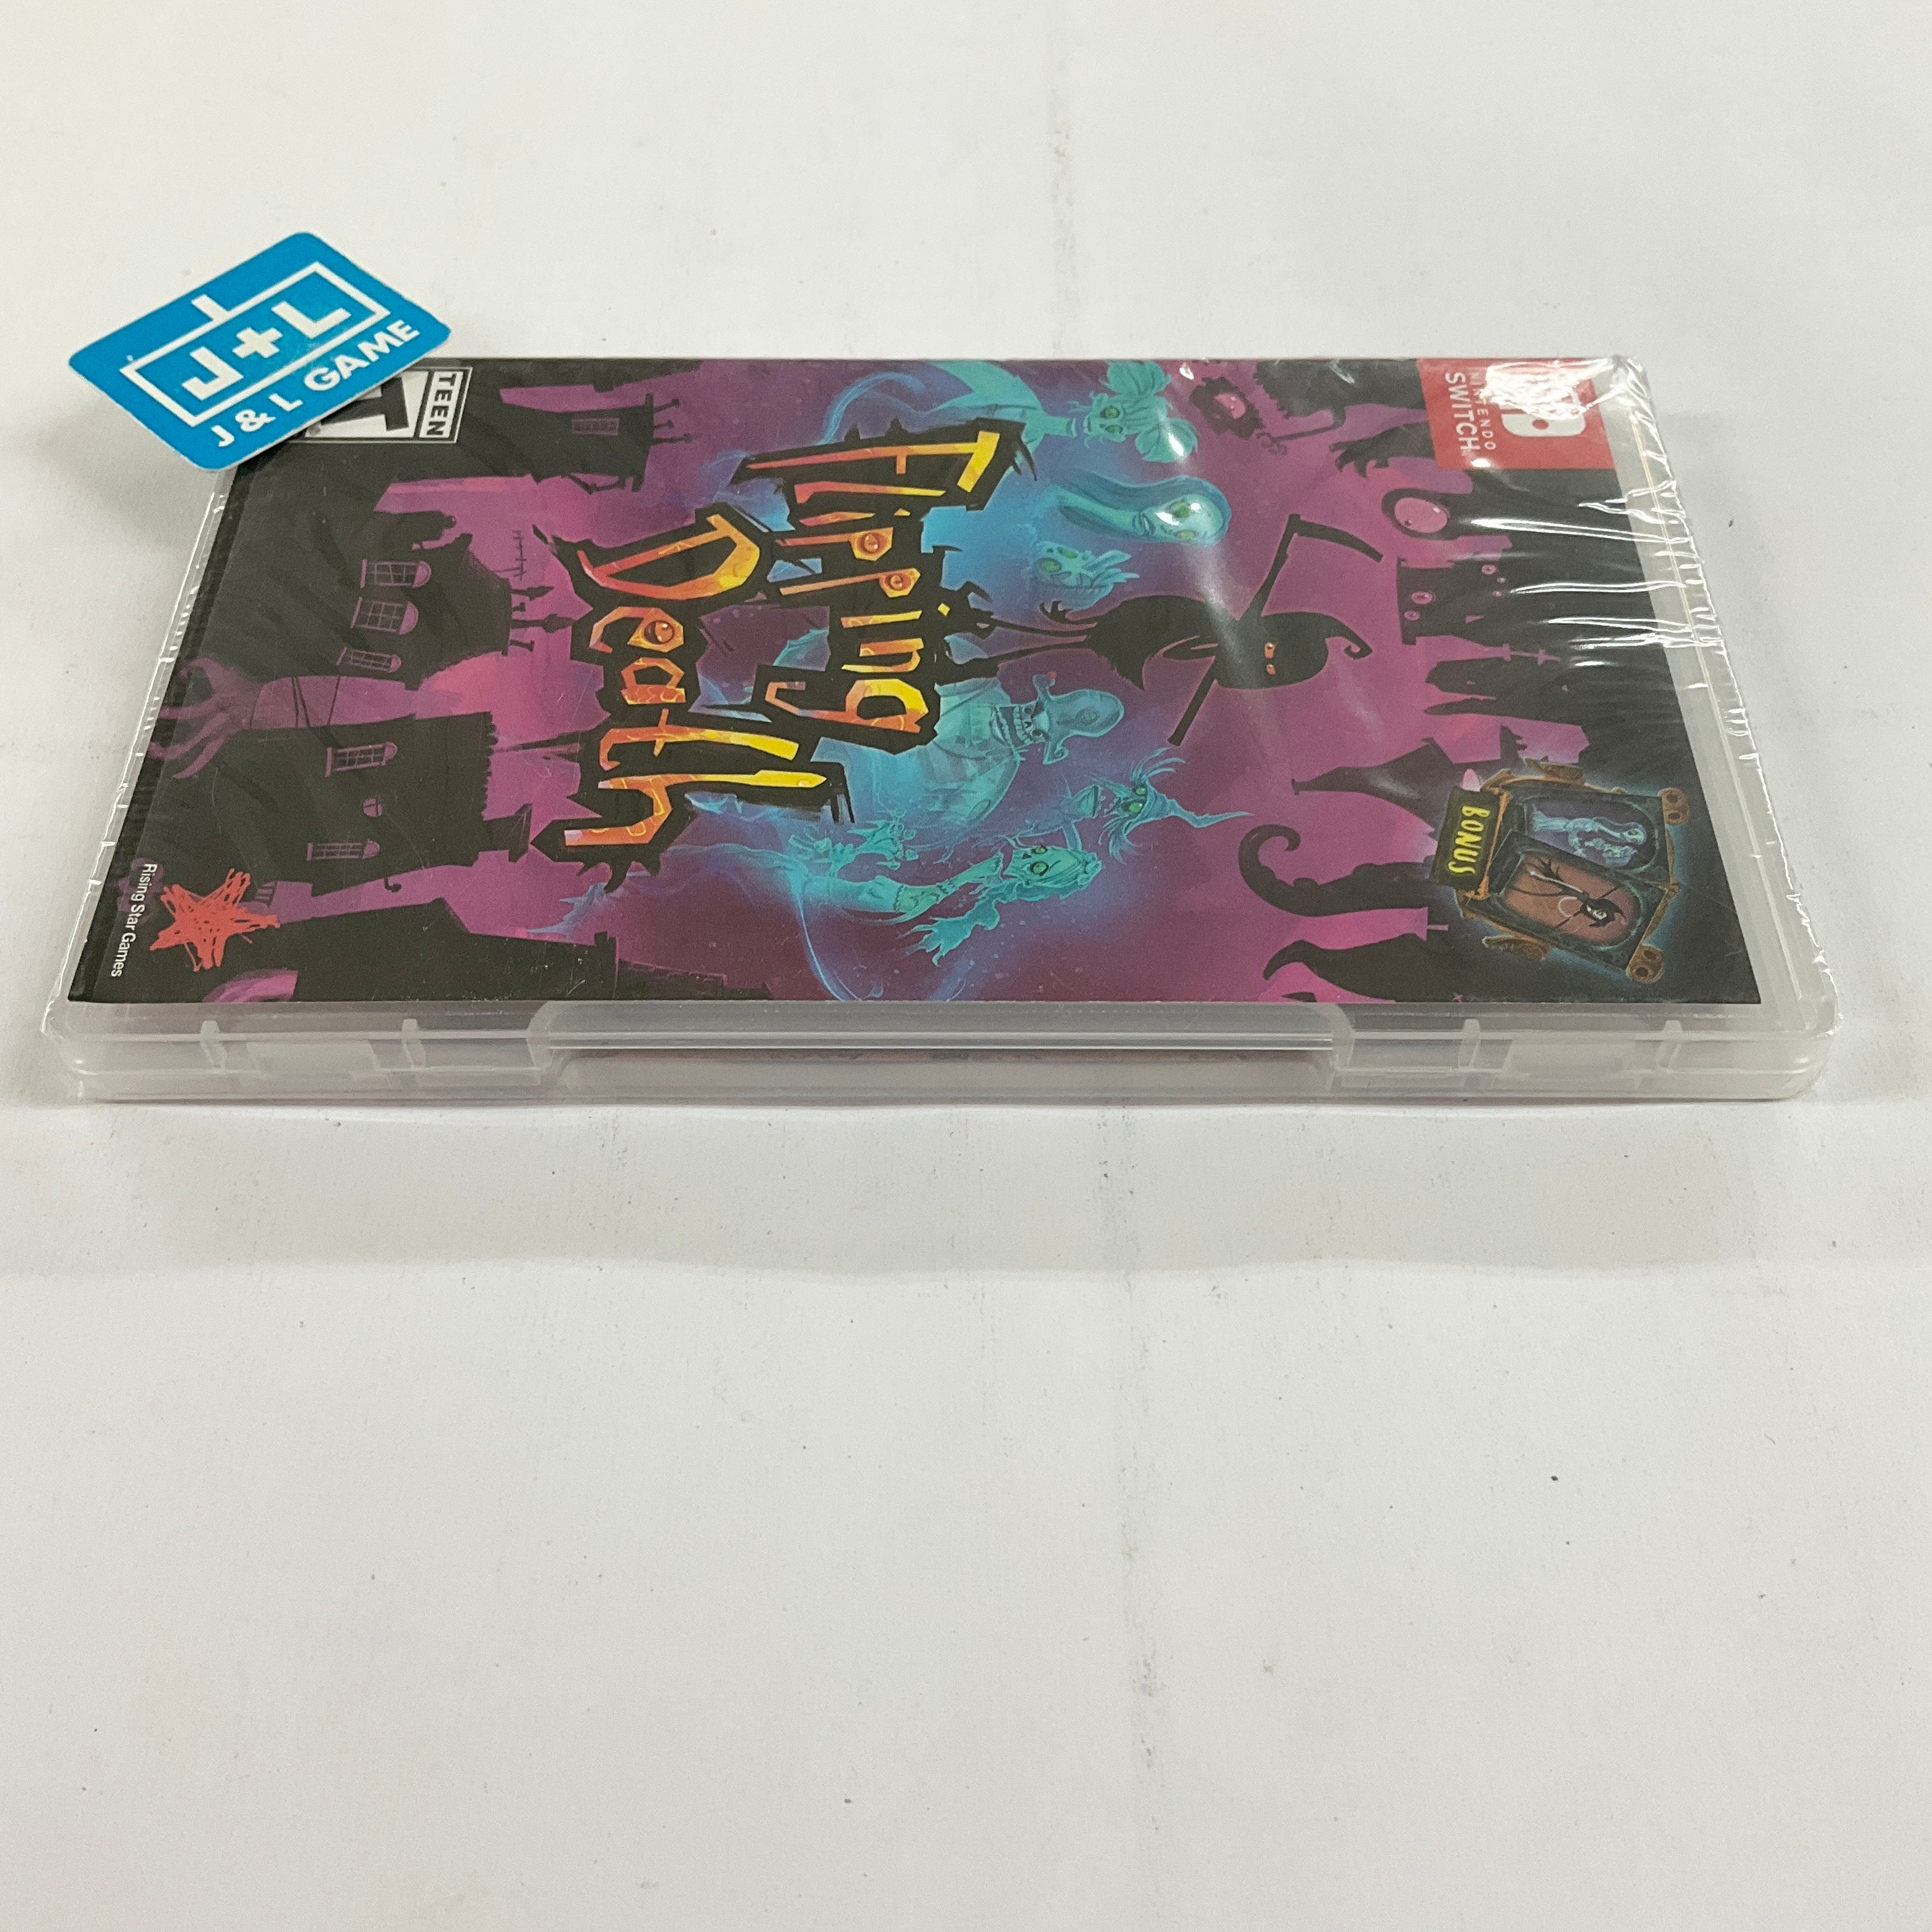 Flipping Death - (NSW) Nintendo Switch Video Games Rising Star Games   